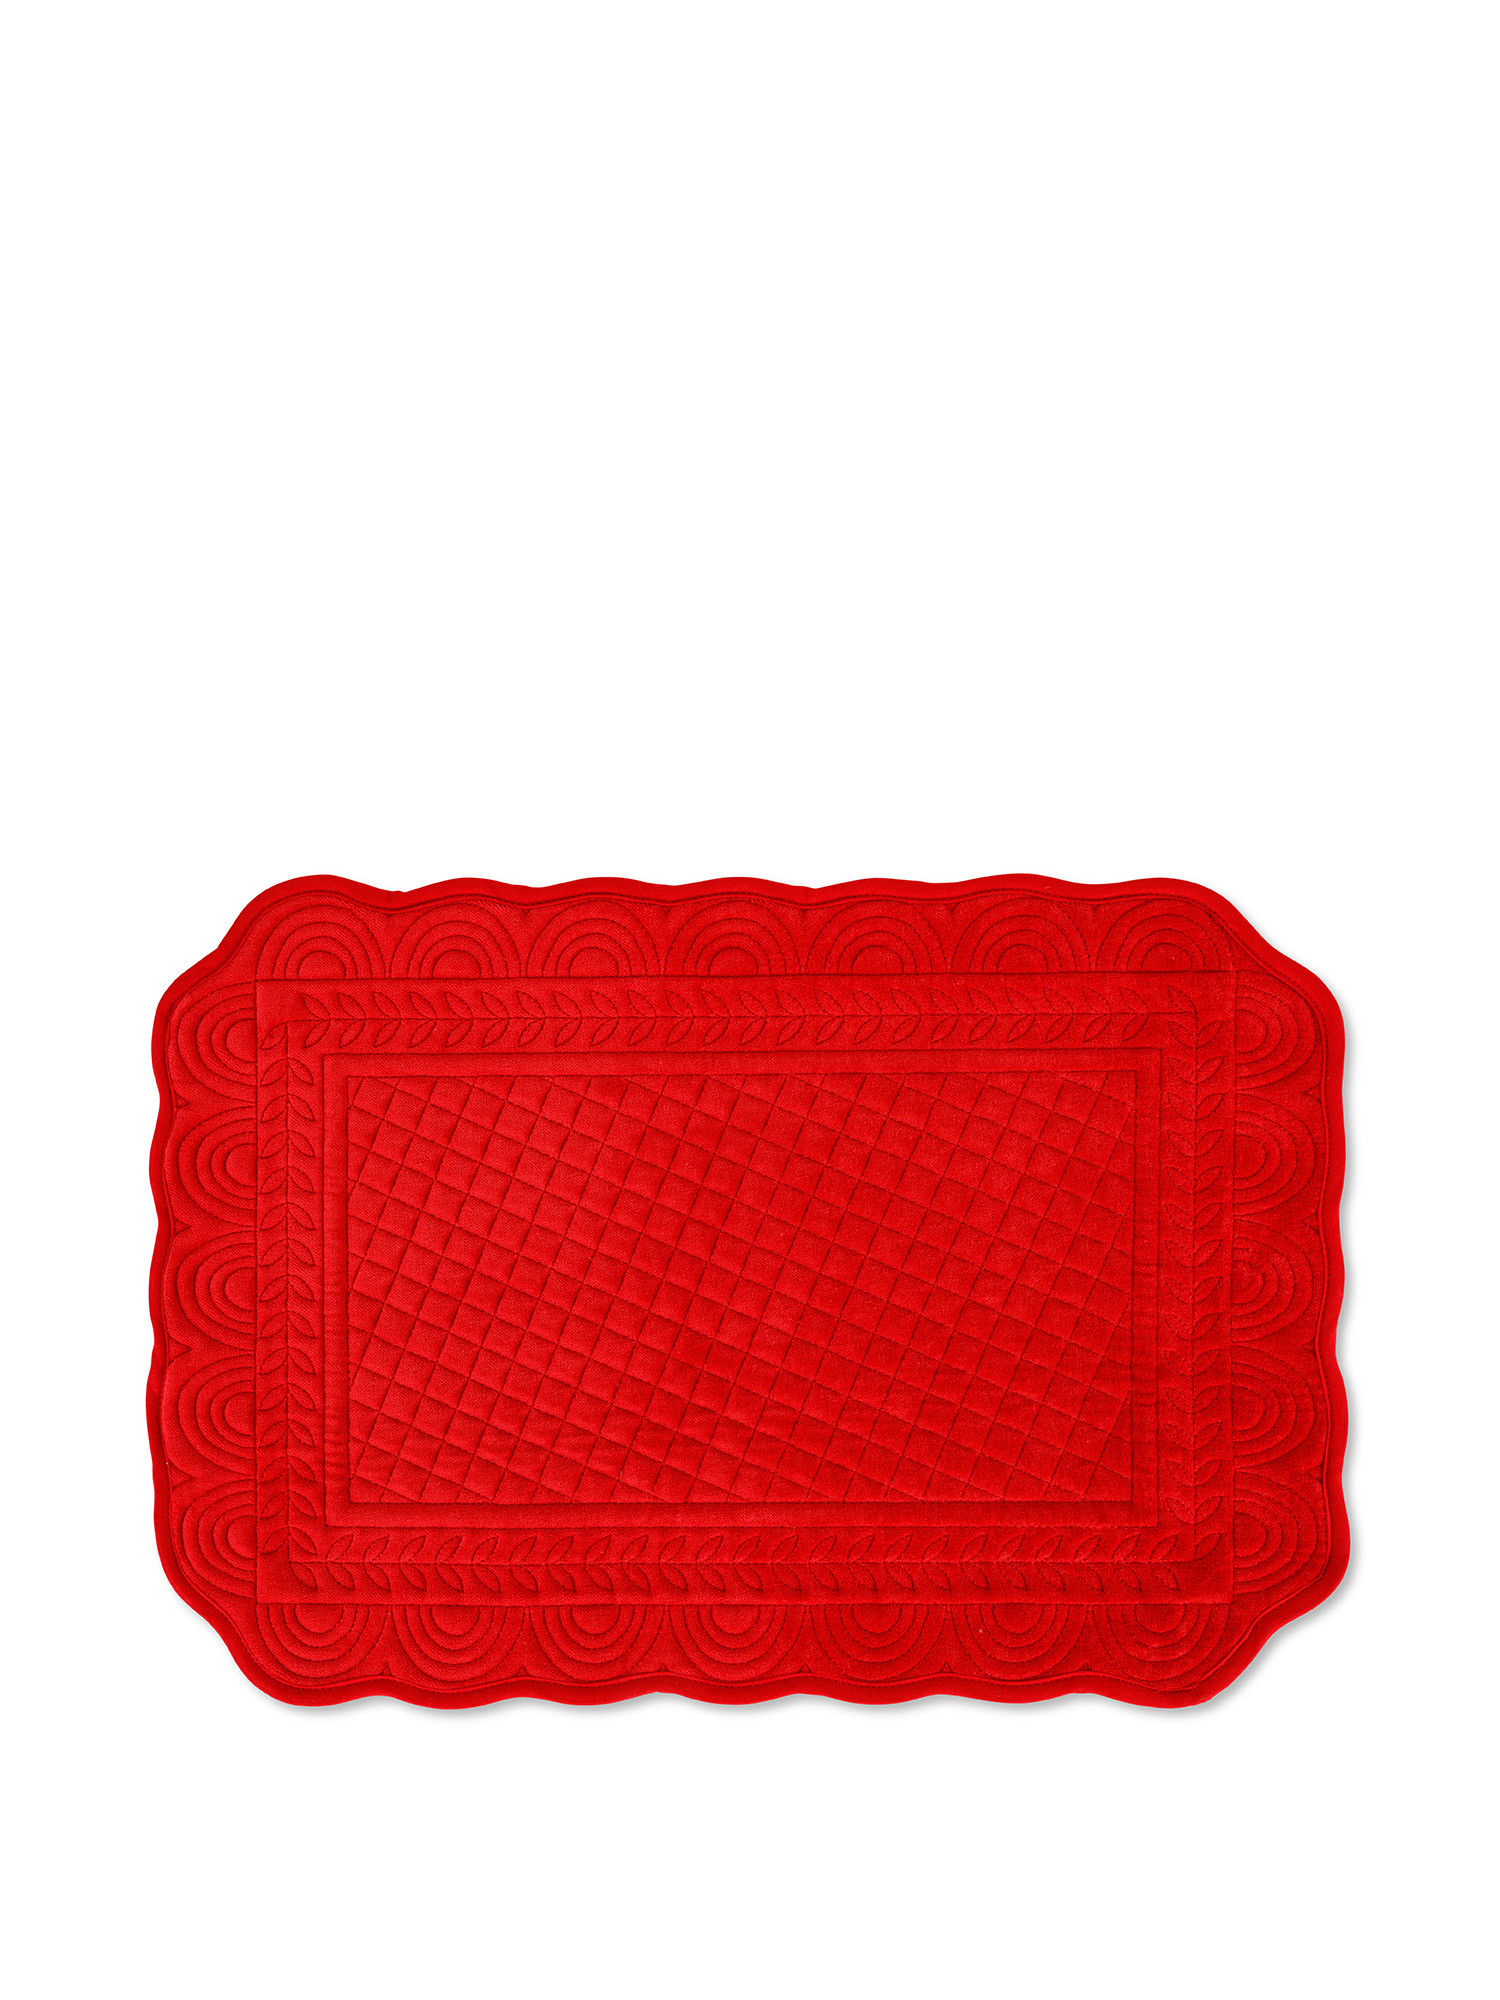 Plain color cotton velvet quilted placemat, Red, large image number 0